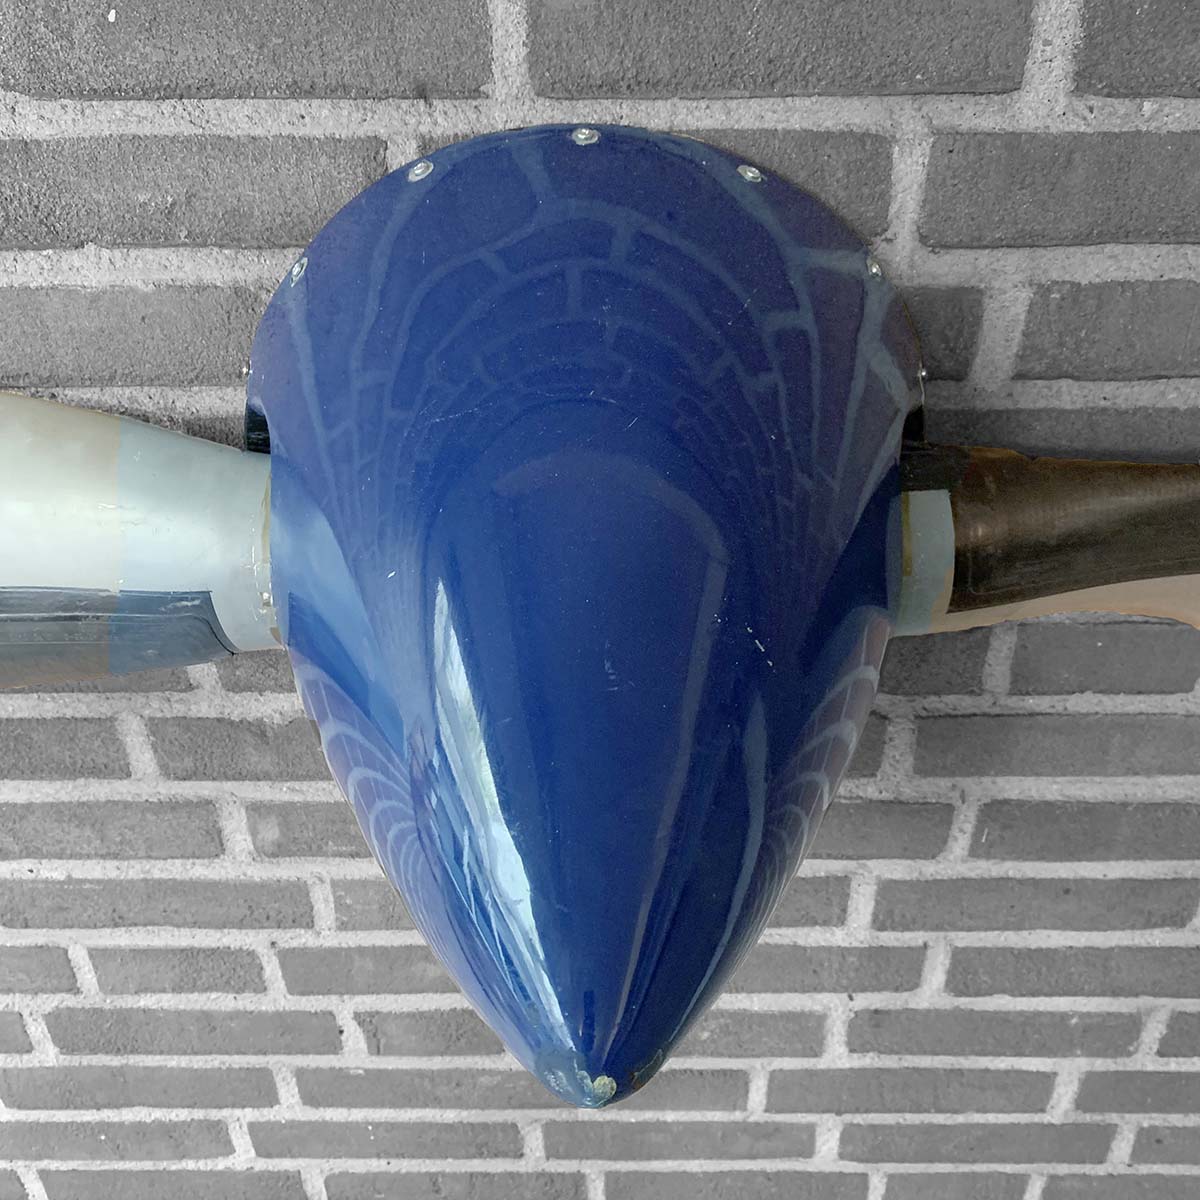 Detail of the spinner of a two-bladed Hartzell propeller that is available as a decorative wall hanger.